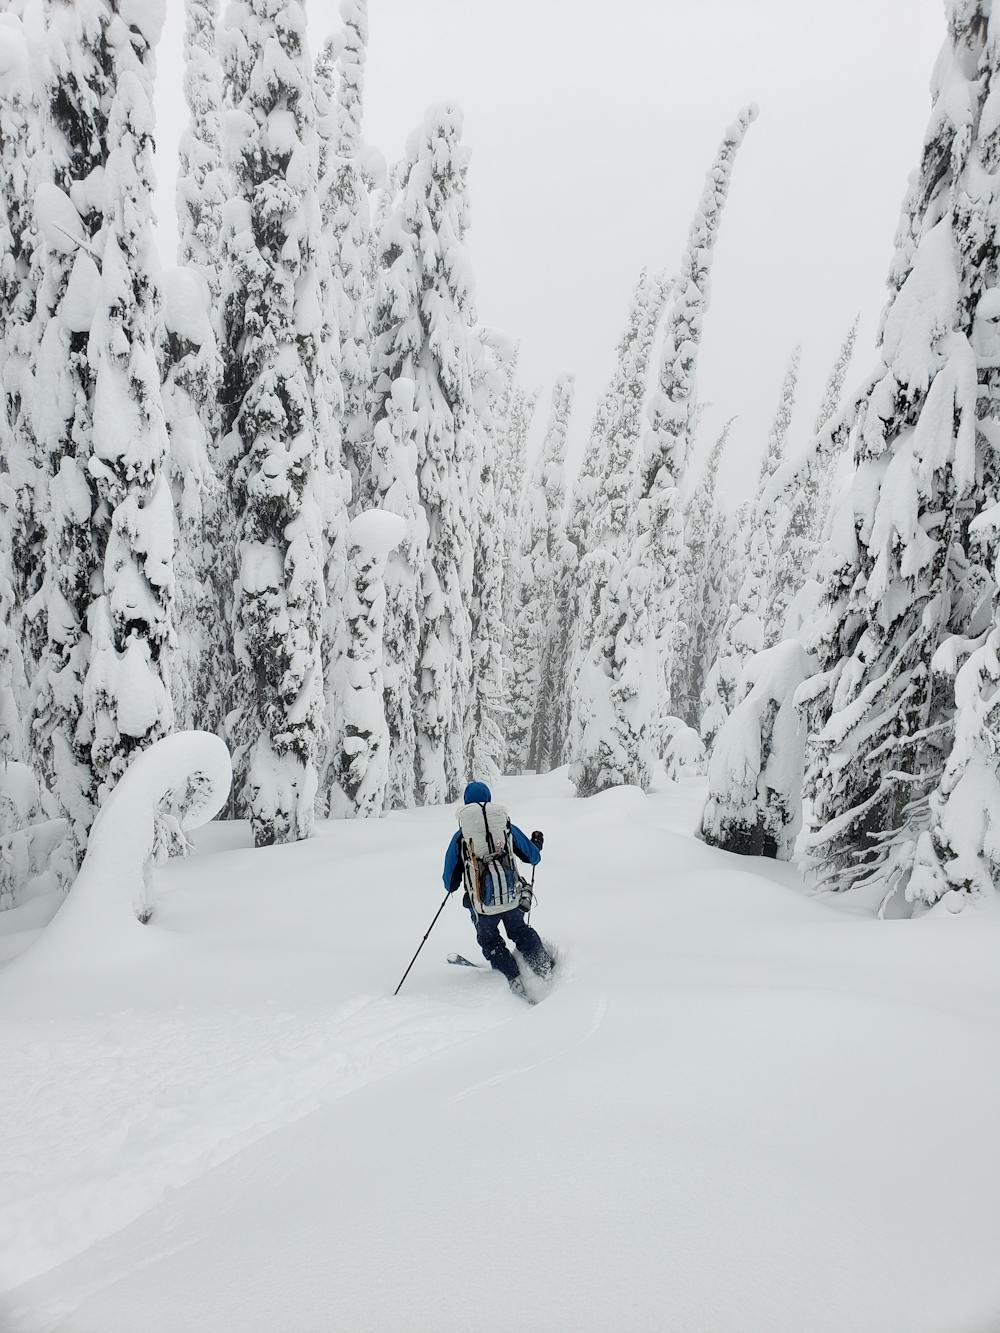 Great skiing in the trees